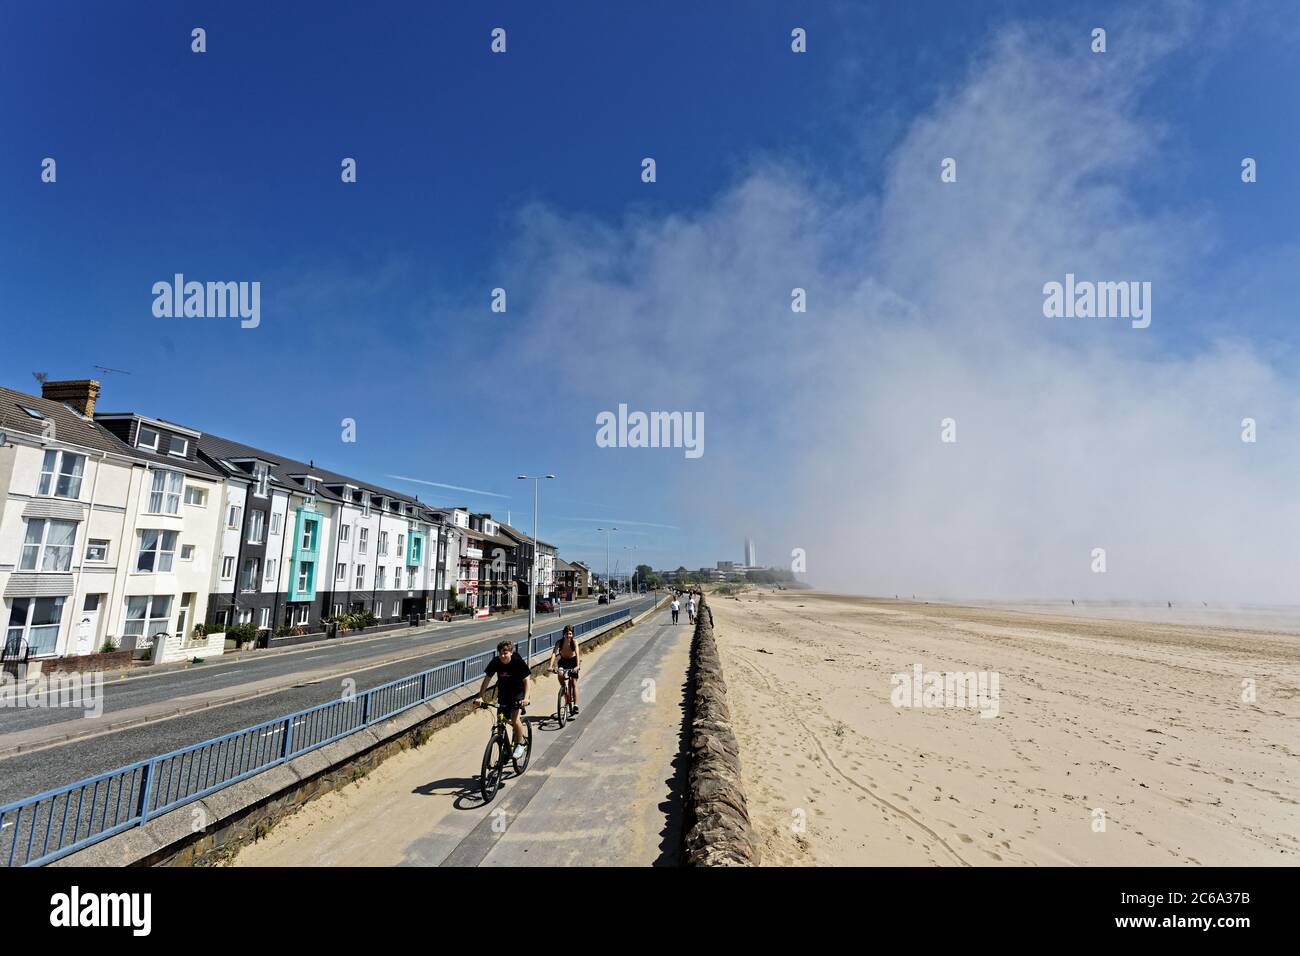 Pictured: The low cloud seen over the beach, whereas houses across the road are exposed to the sun in Swansea Bay, Wales, UK. Wednesday 20 May 2020 Re Stock Photo